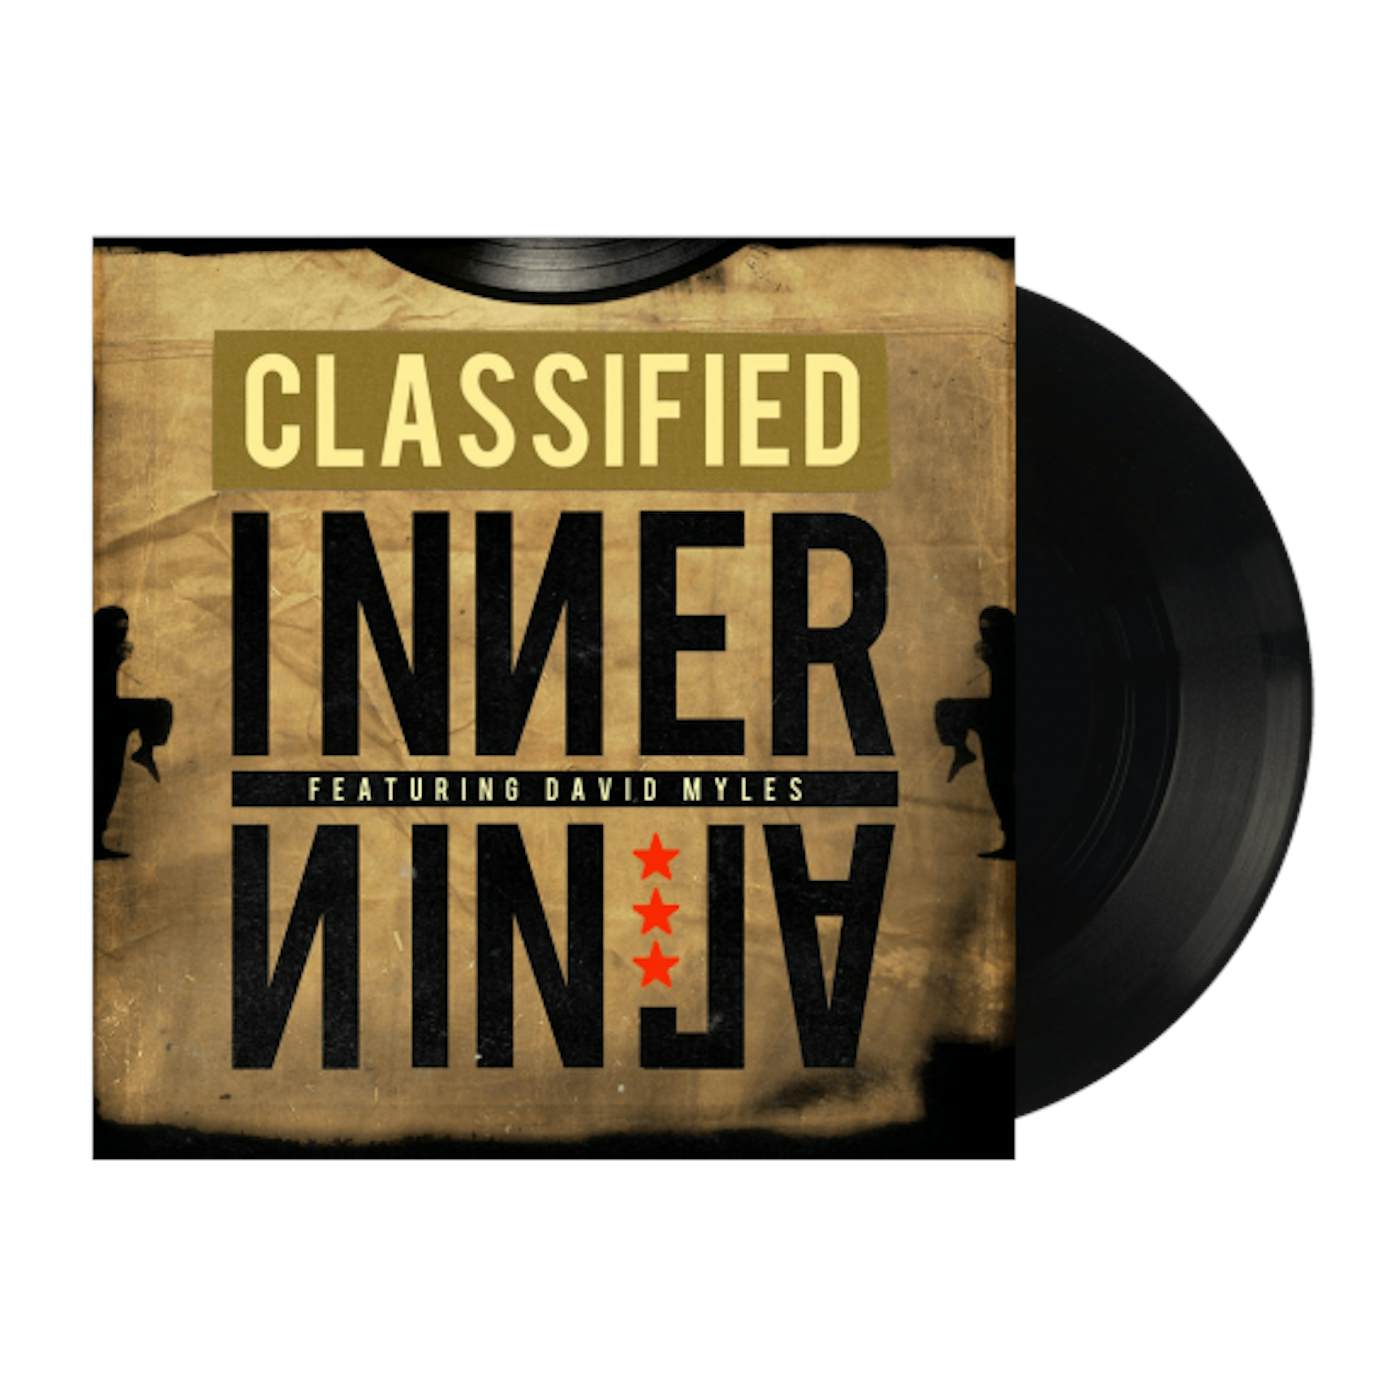 Classified Inner Ninja / Anything Goes 7" Vinyl (Limited Edition)